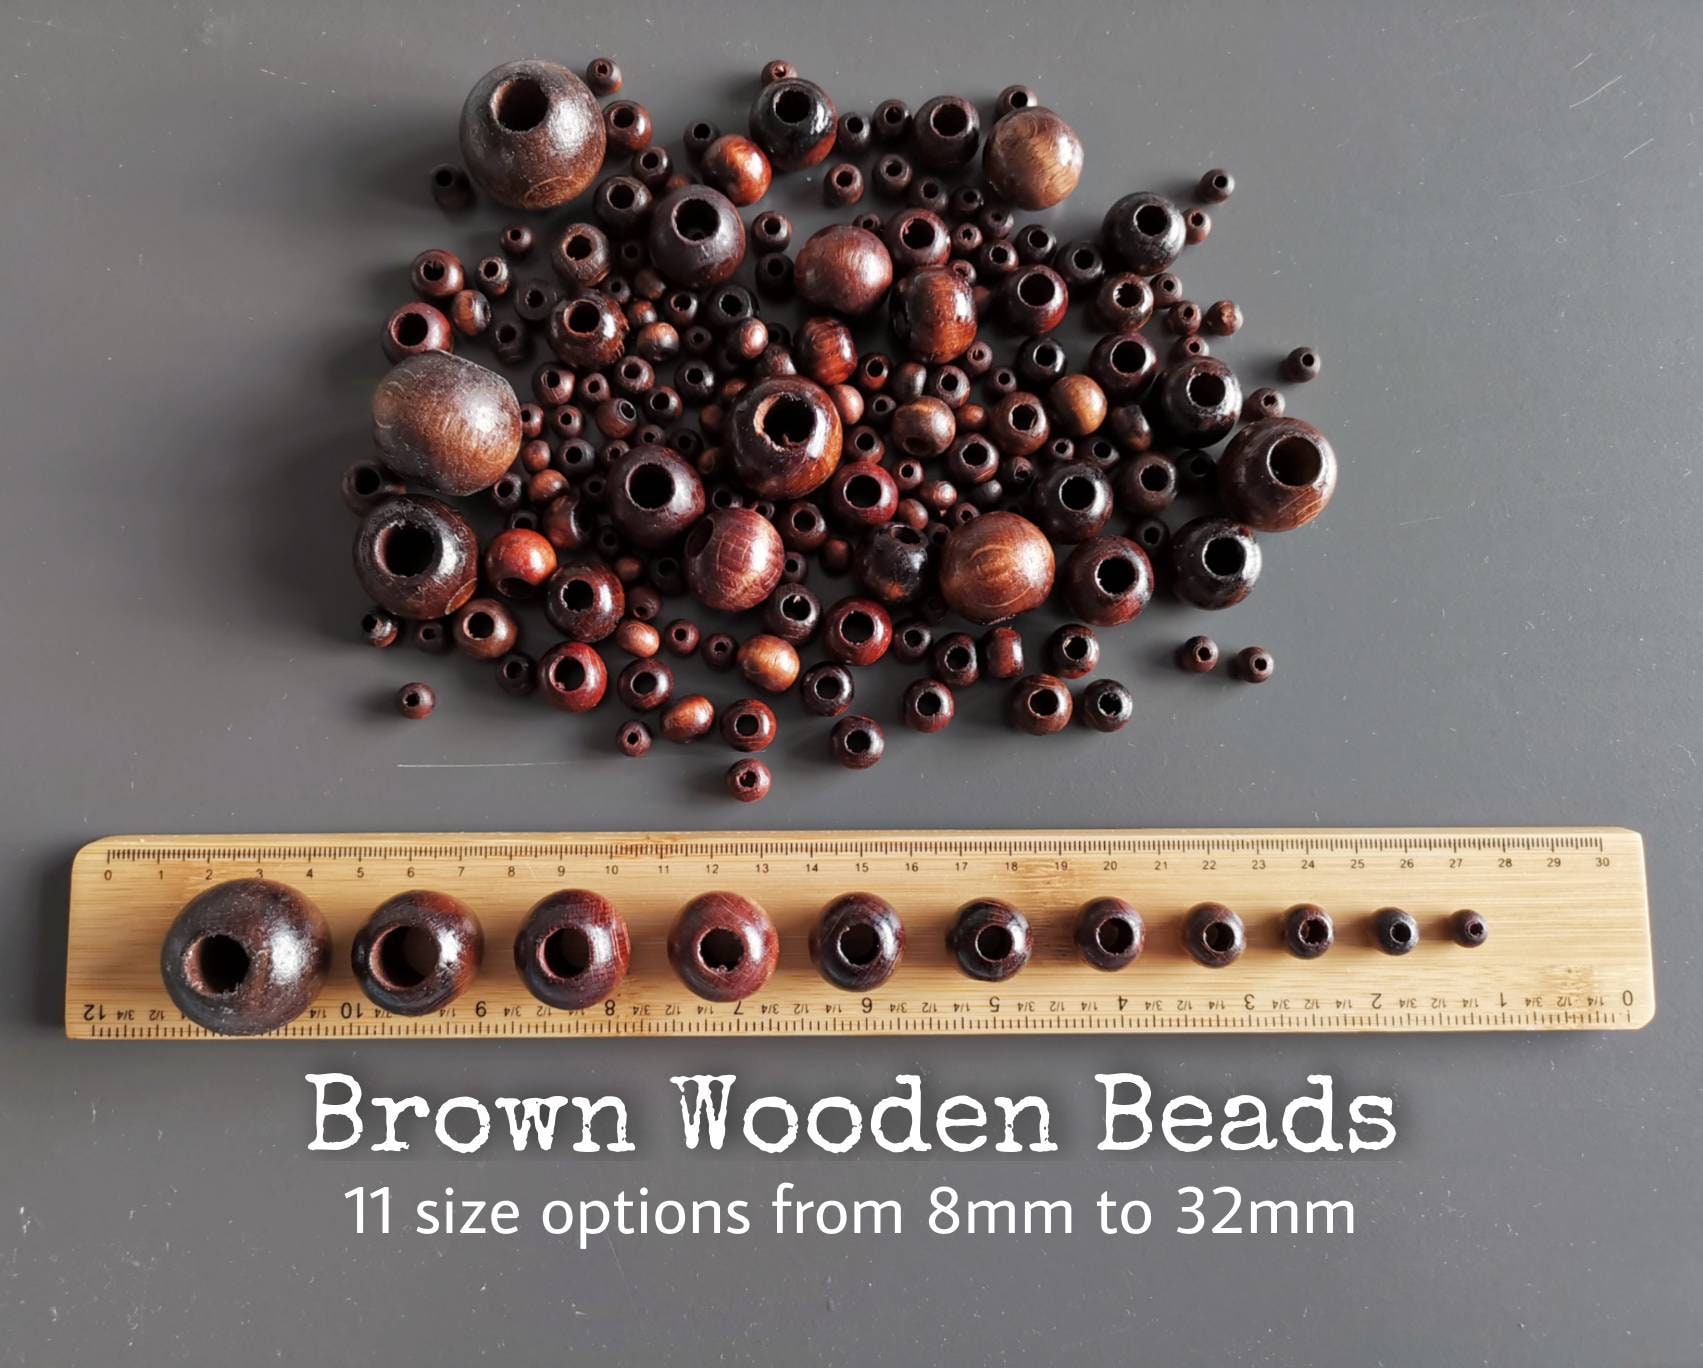 Natural Brown Mixed Wooden Beads, Size 12 Mm , Craft Jewellery